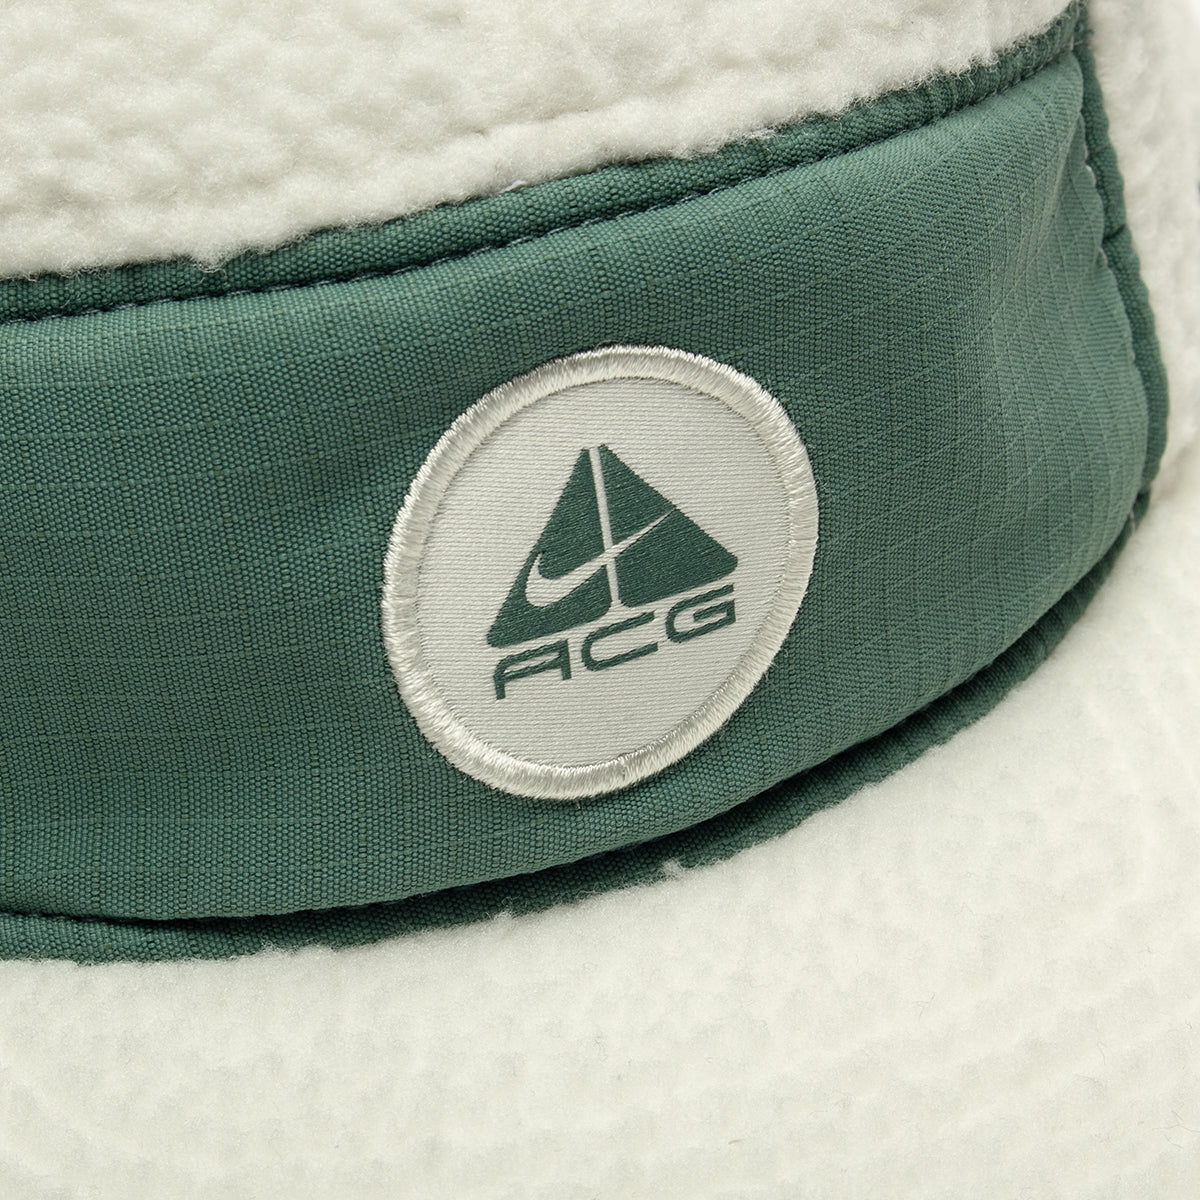 Nike | ACG Therma-Fit Fly Unstructured Cap Style # FN4411-133 Color : Sail / Bicoastal